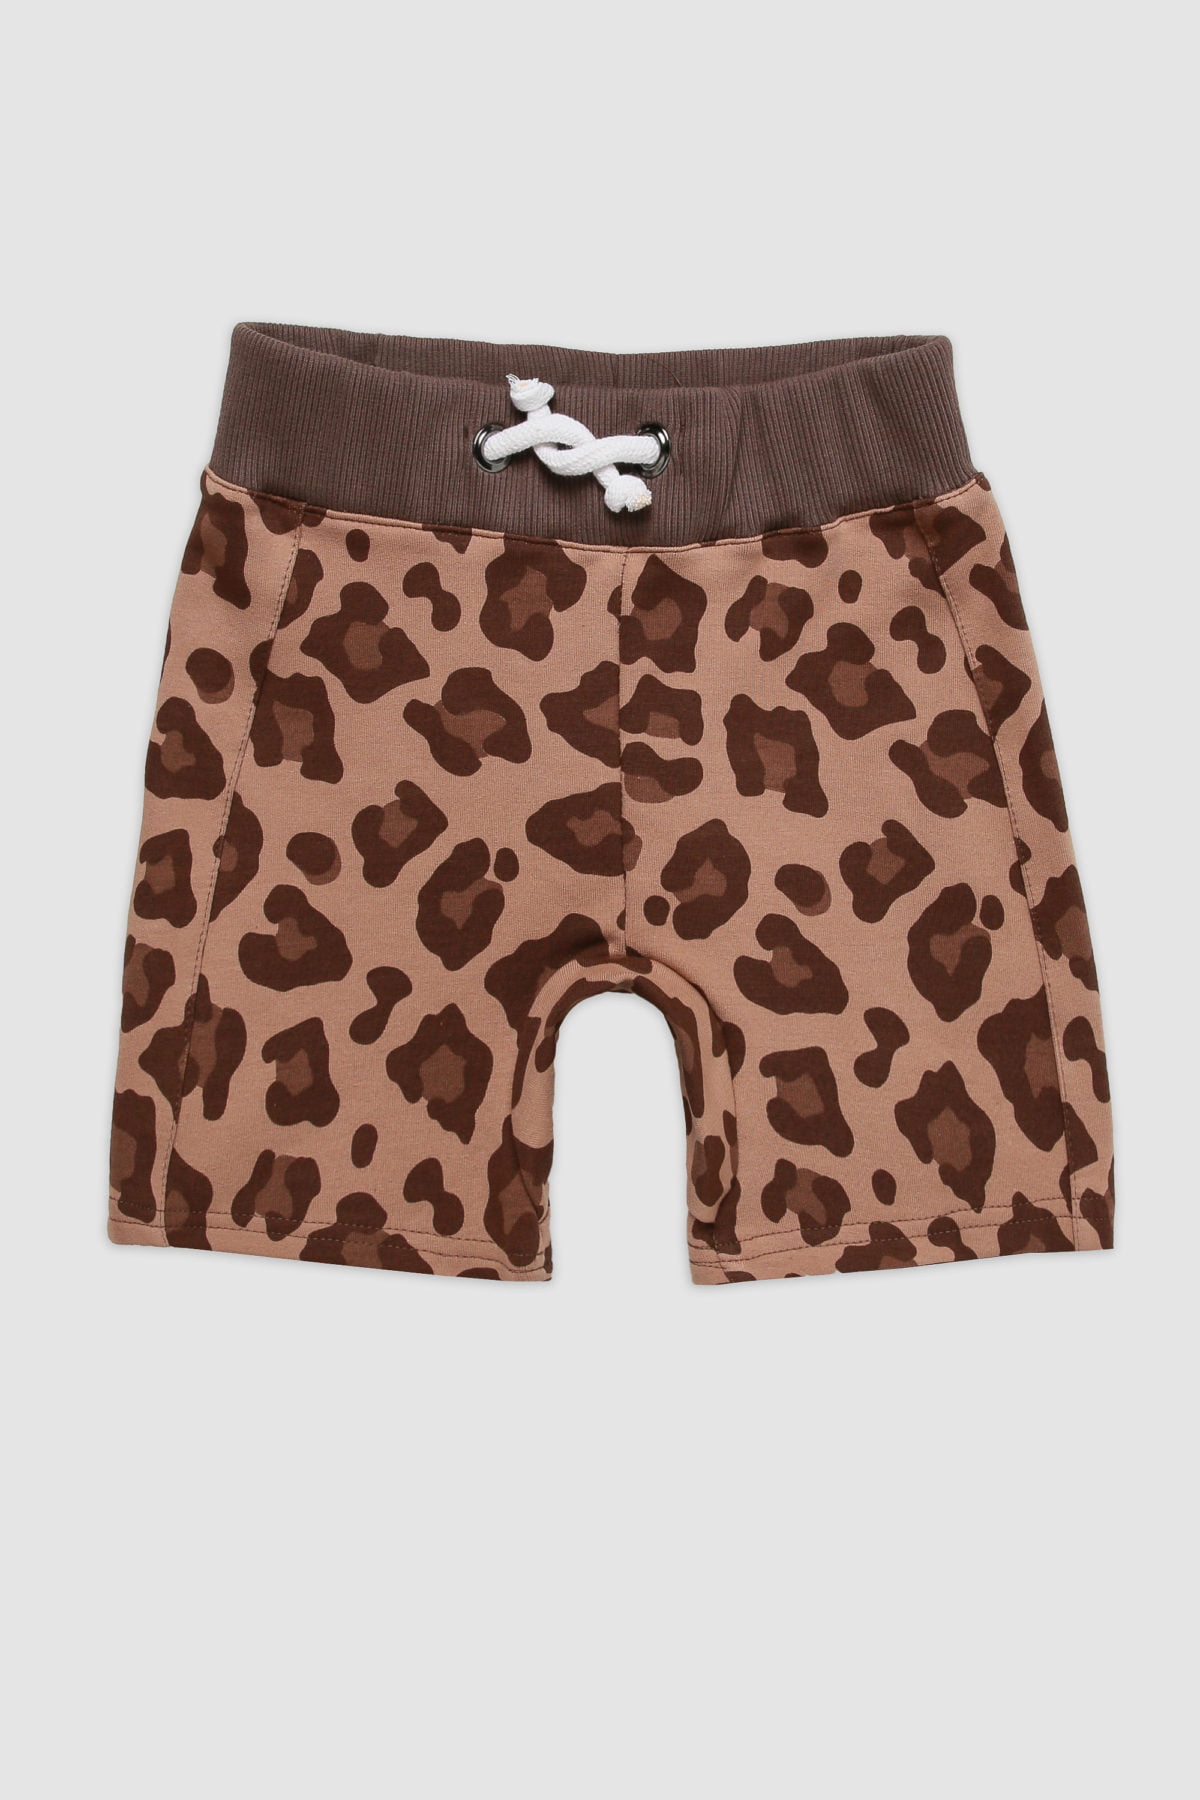 leopard shorts scaled